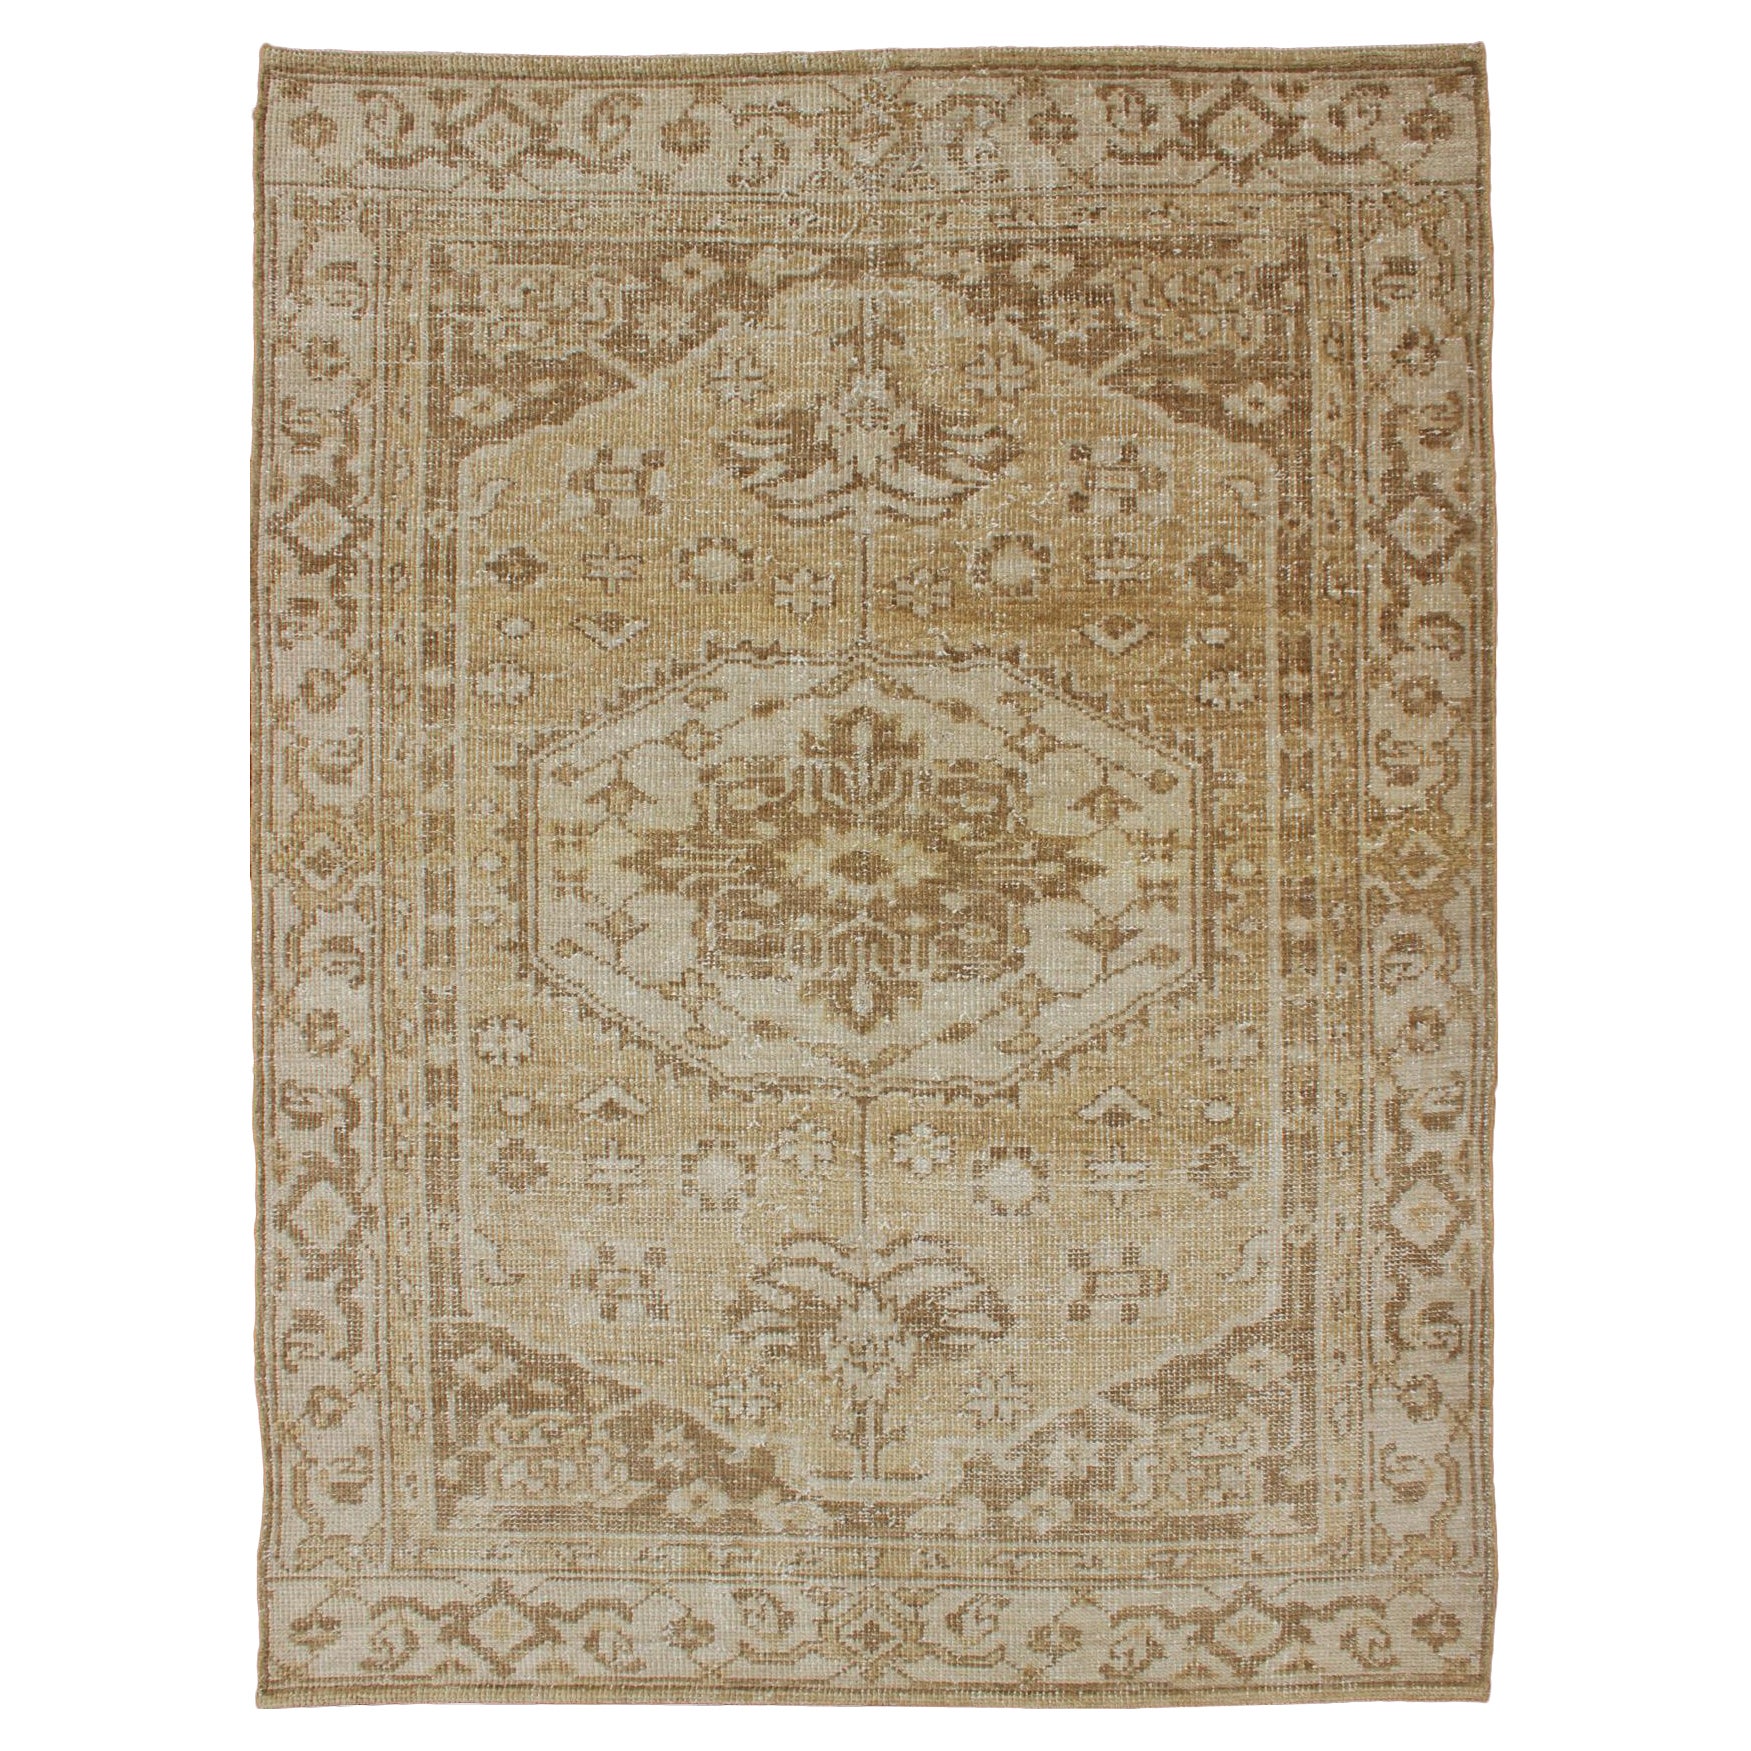 Medallion Design Oushak with Brown, Yellow, Golden Brown, and Cream For Sale